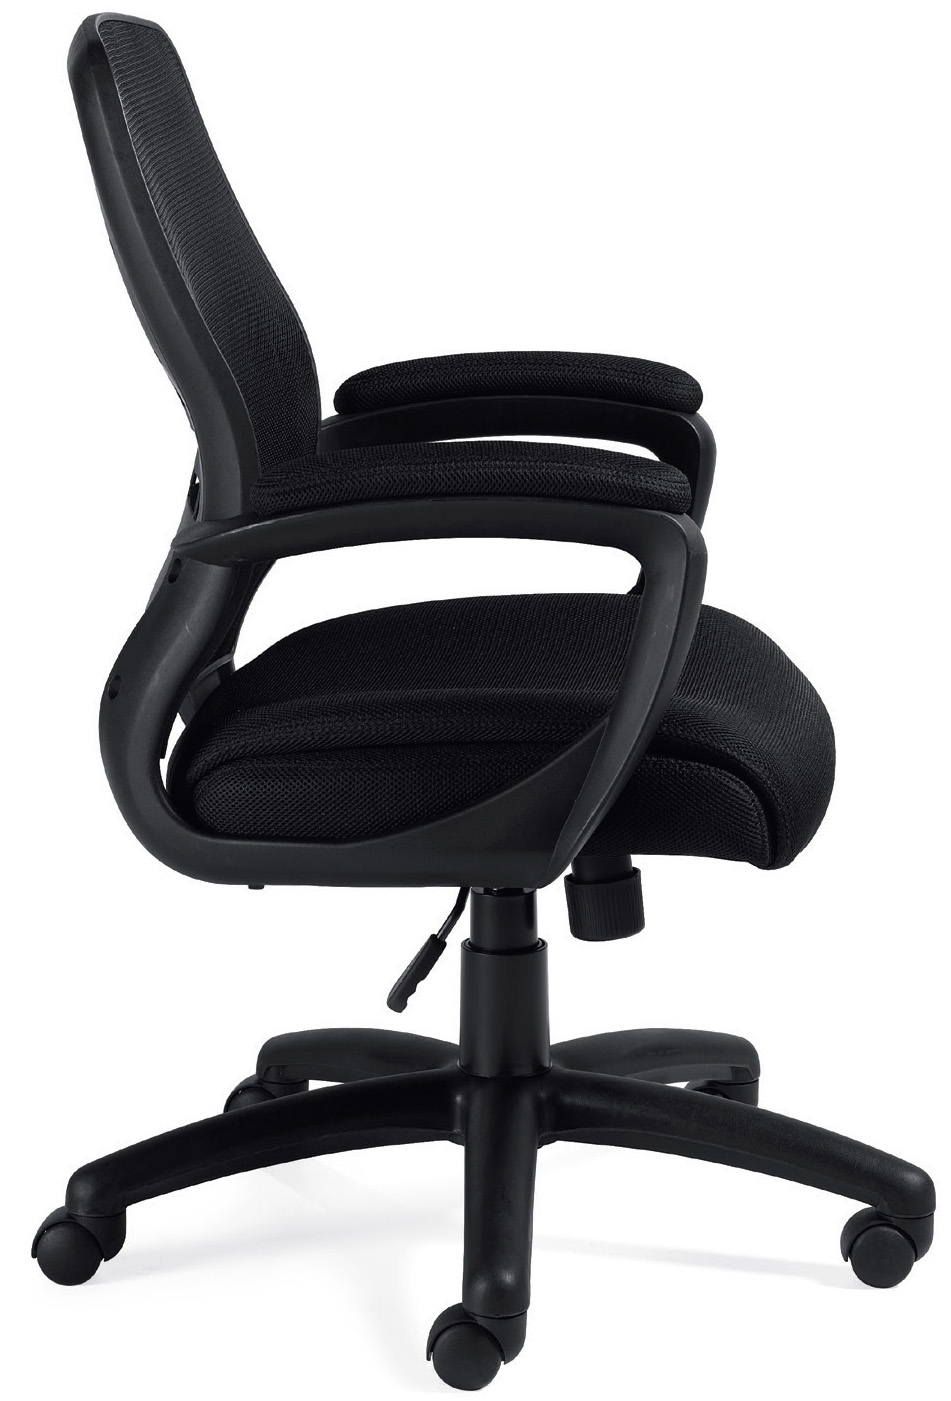 Offices To Go™ Mesh Manager Chair, OTG11750B